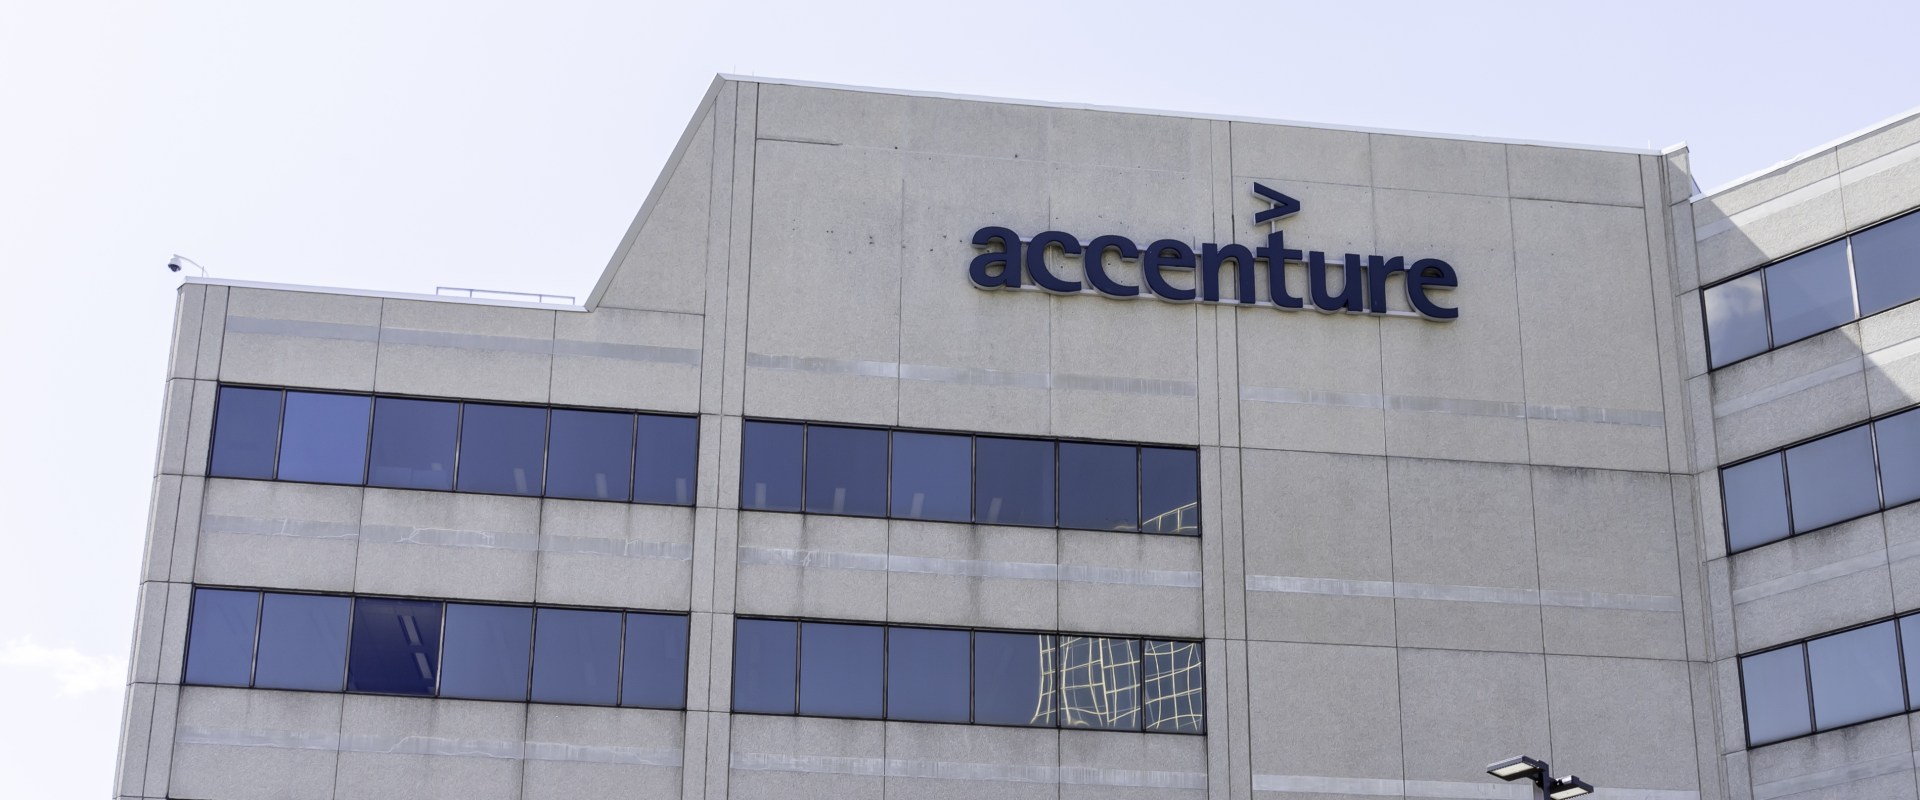 The Big 5 and Accenture: A Look at the Relationship